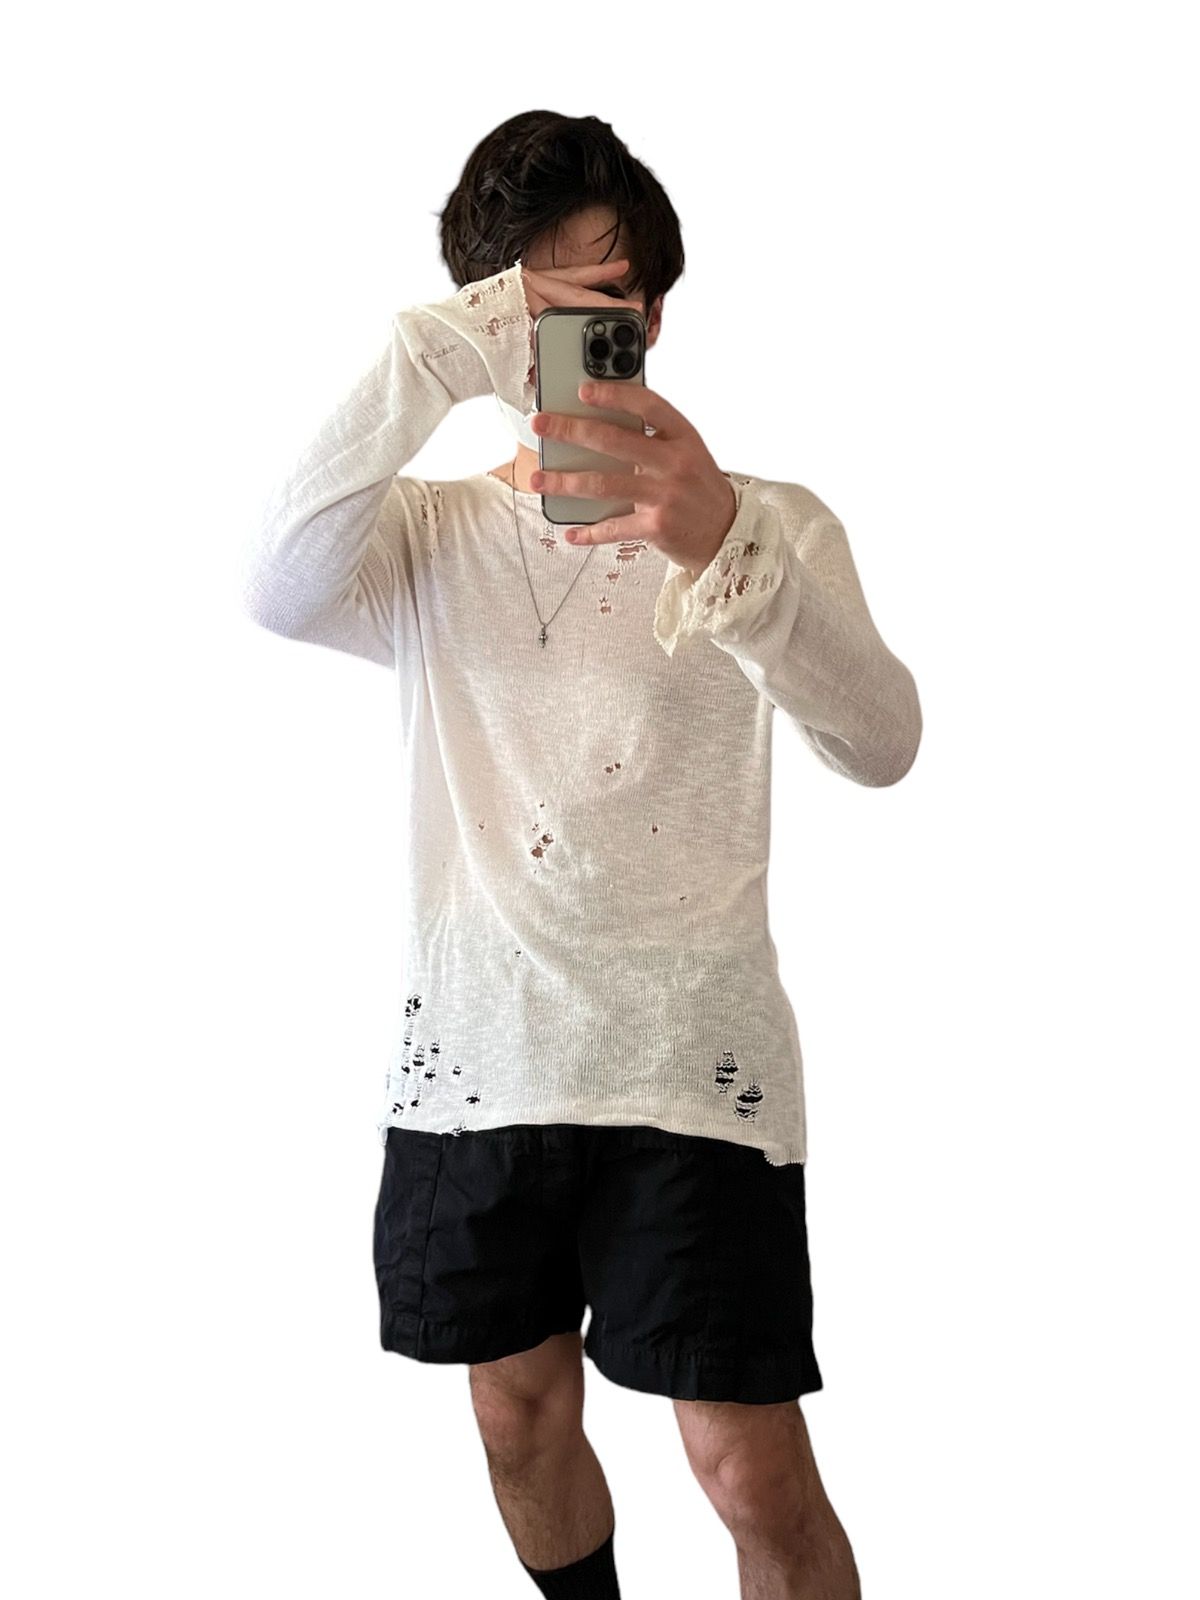 Pre-owned Enfants Riches Deprimes 2015 1/1 Thrashed Pulled Cashmere Distressed Knit In White